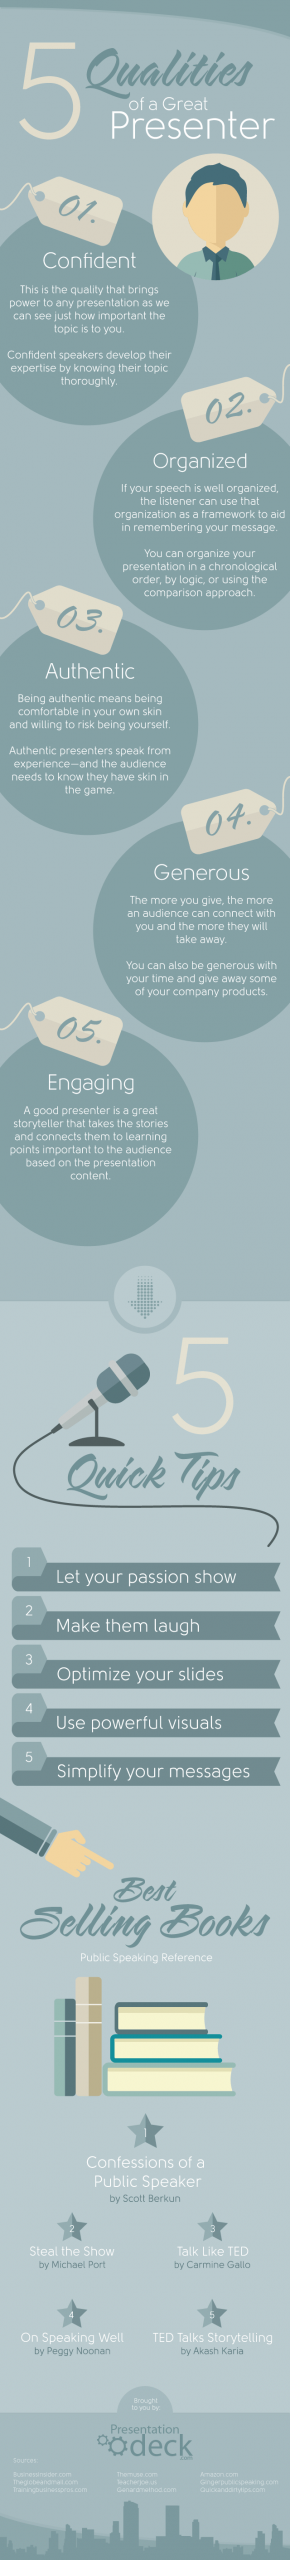 5 Qualities of a Great Presenter